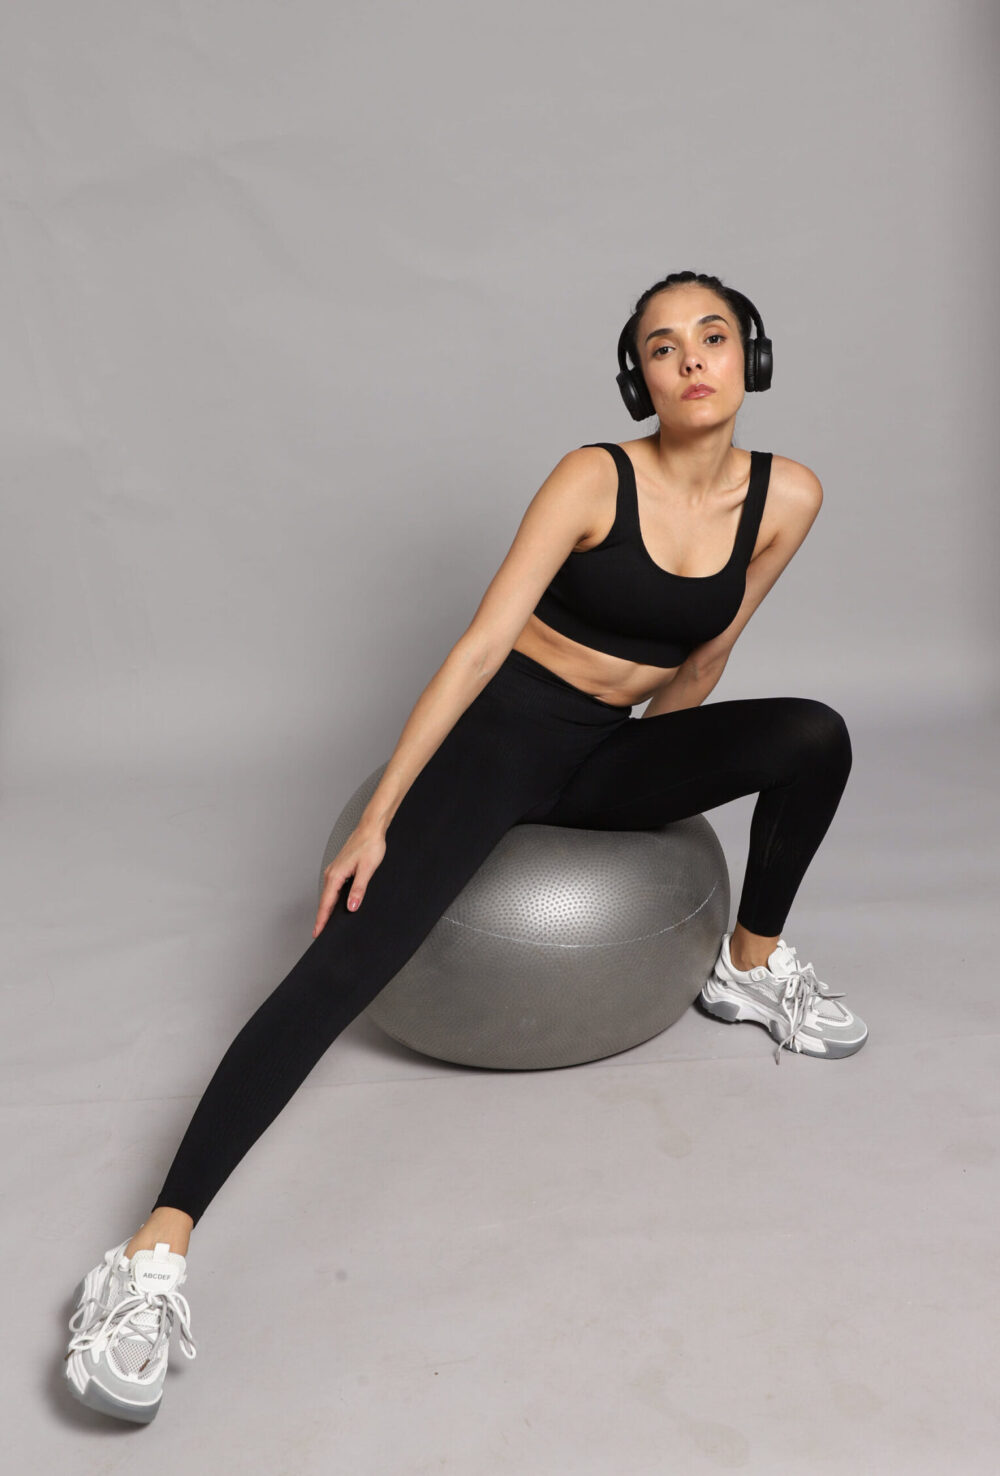 Women's Gym Leggings for Exercising? [Expert's Guide To Chose The